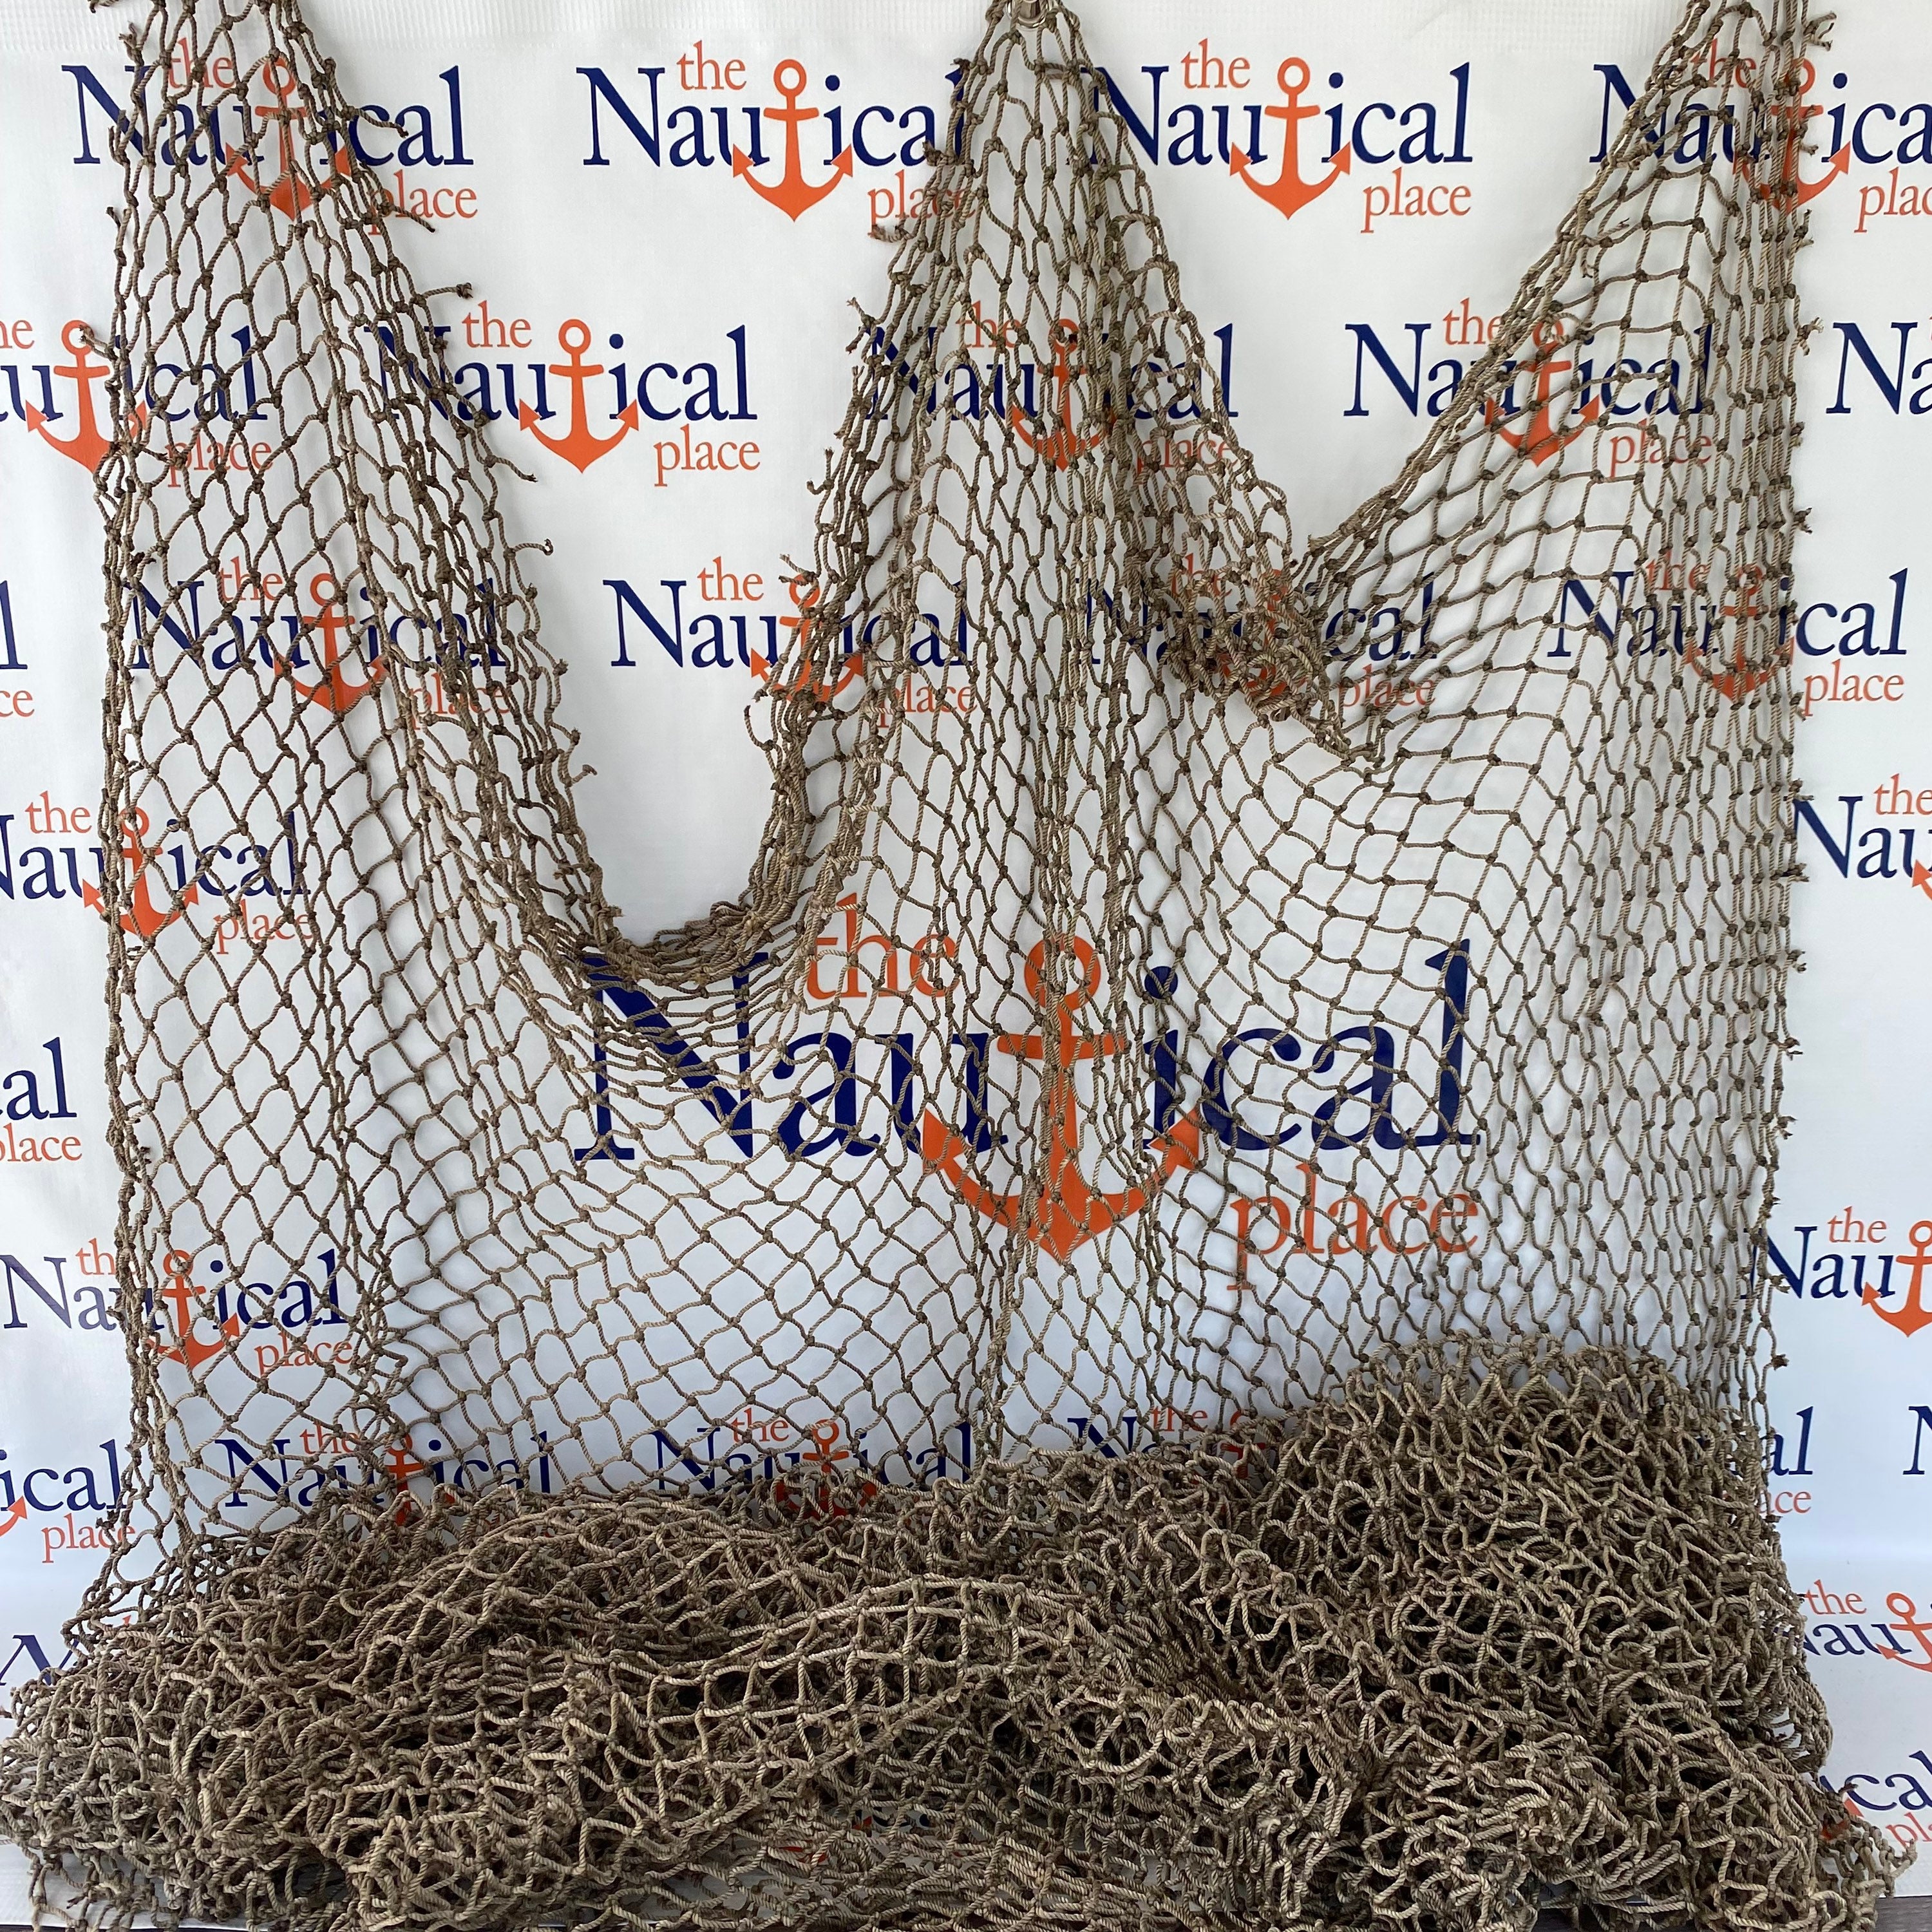 Authentic Fishing Net - 5 ft x 10 ft HEAVY Knotted - Commercial Fish